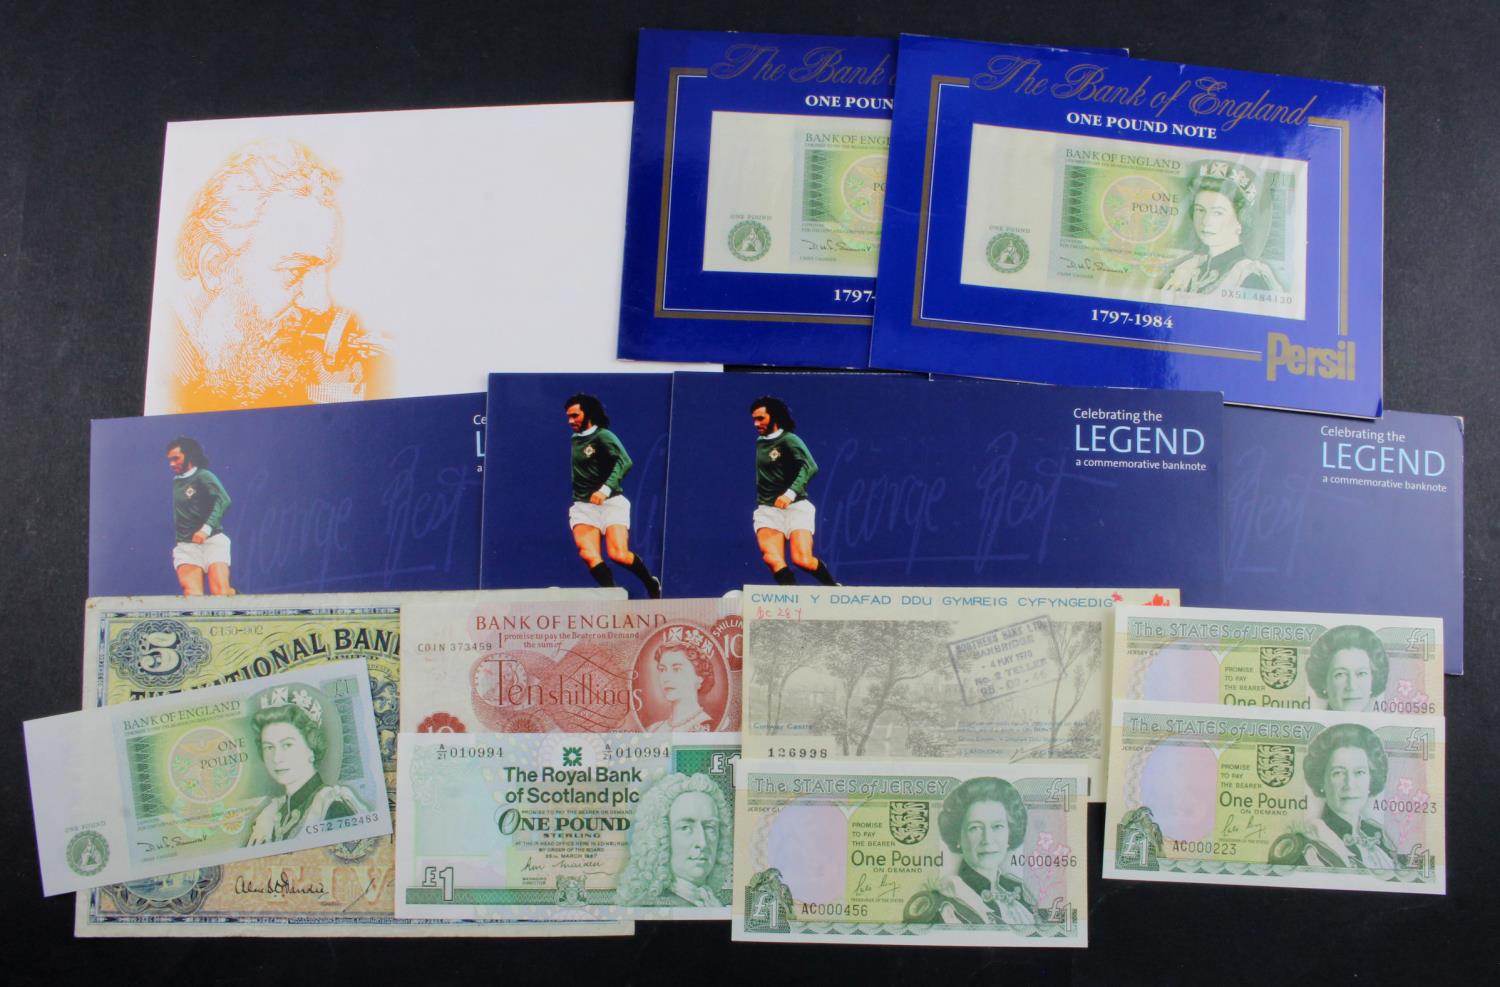 Great Britain (15), Northern Ireland Ulster Bank 5 Pounds (4) dated 25th November 2006, George